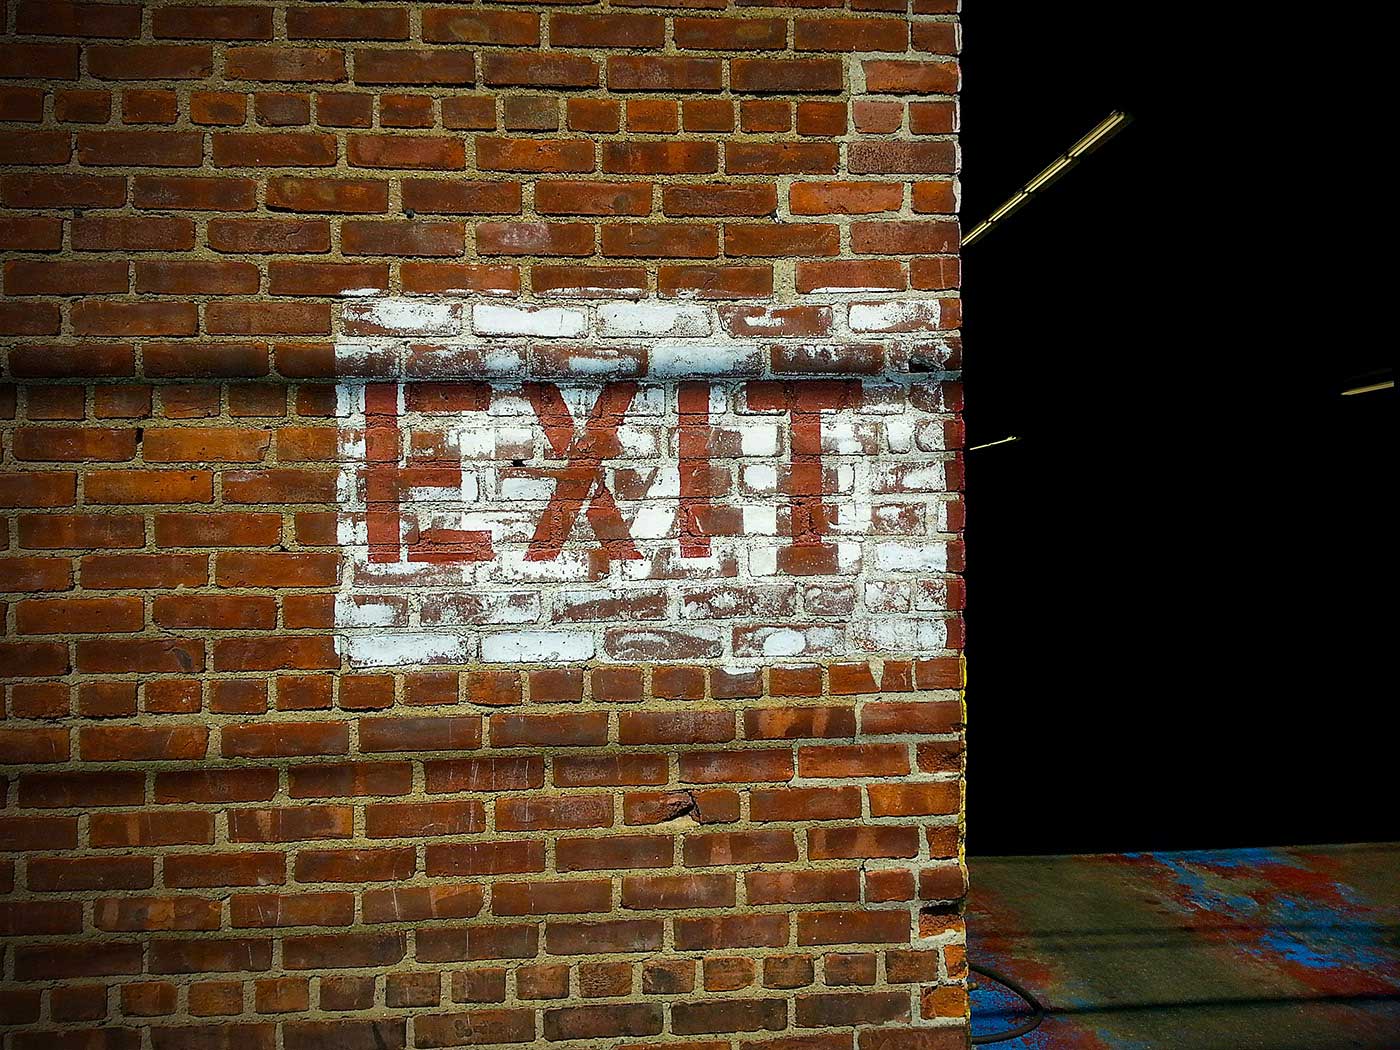 exit photography ©2015 bret wills